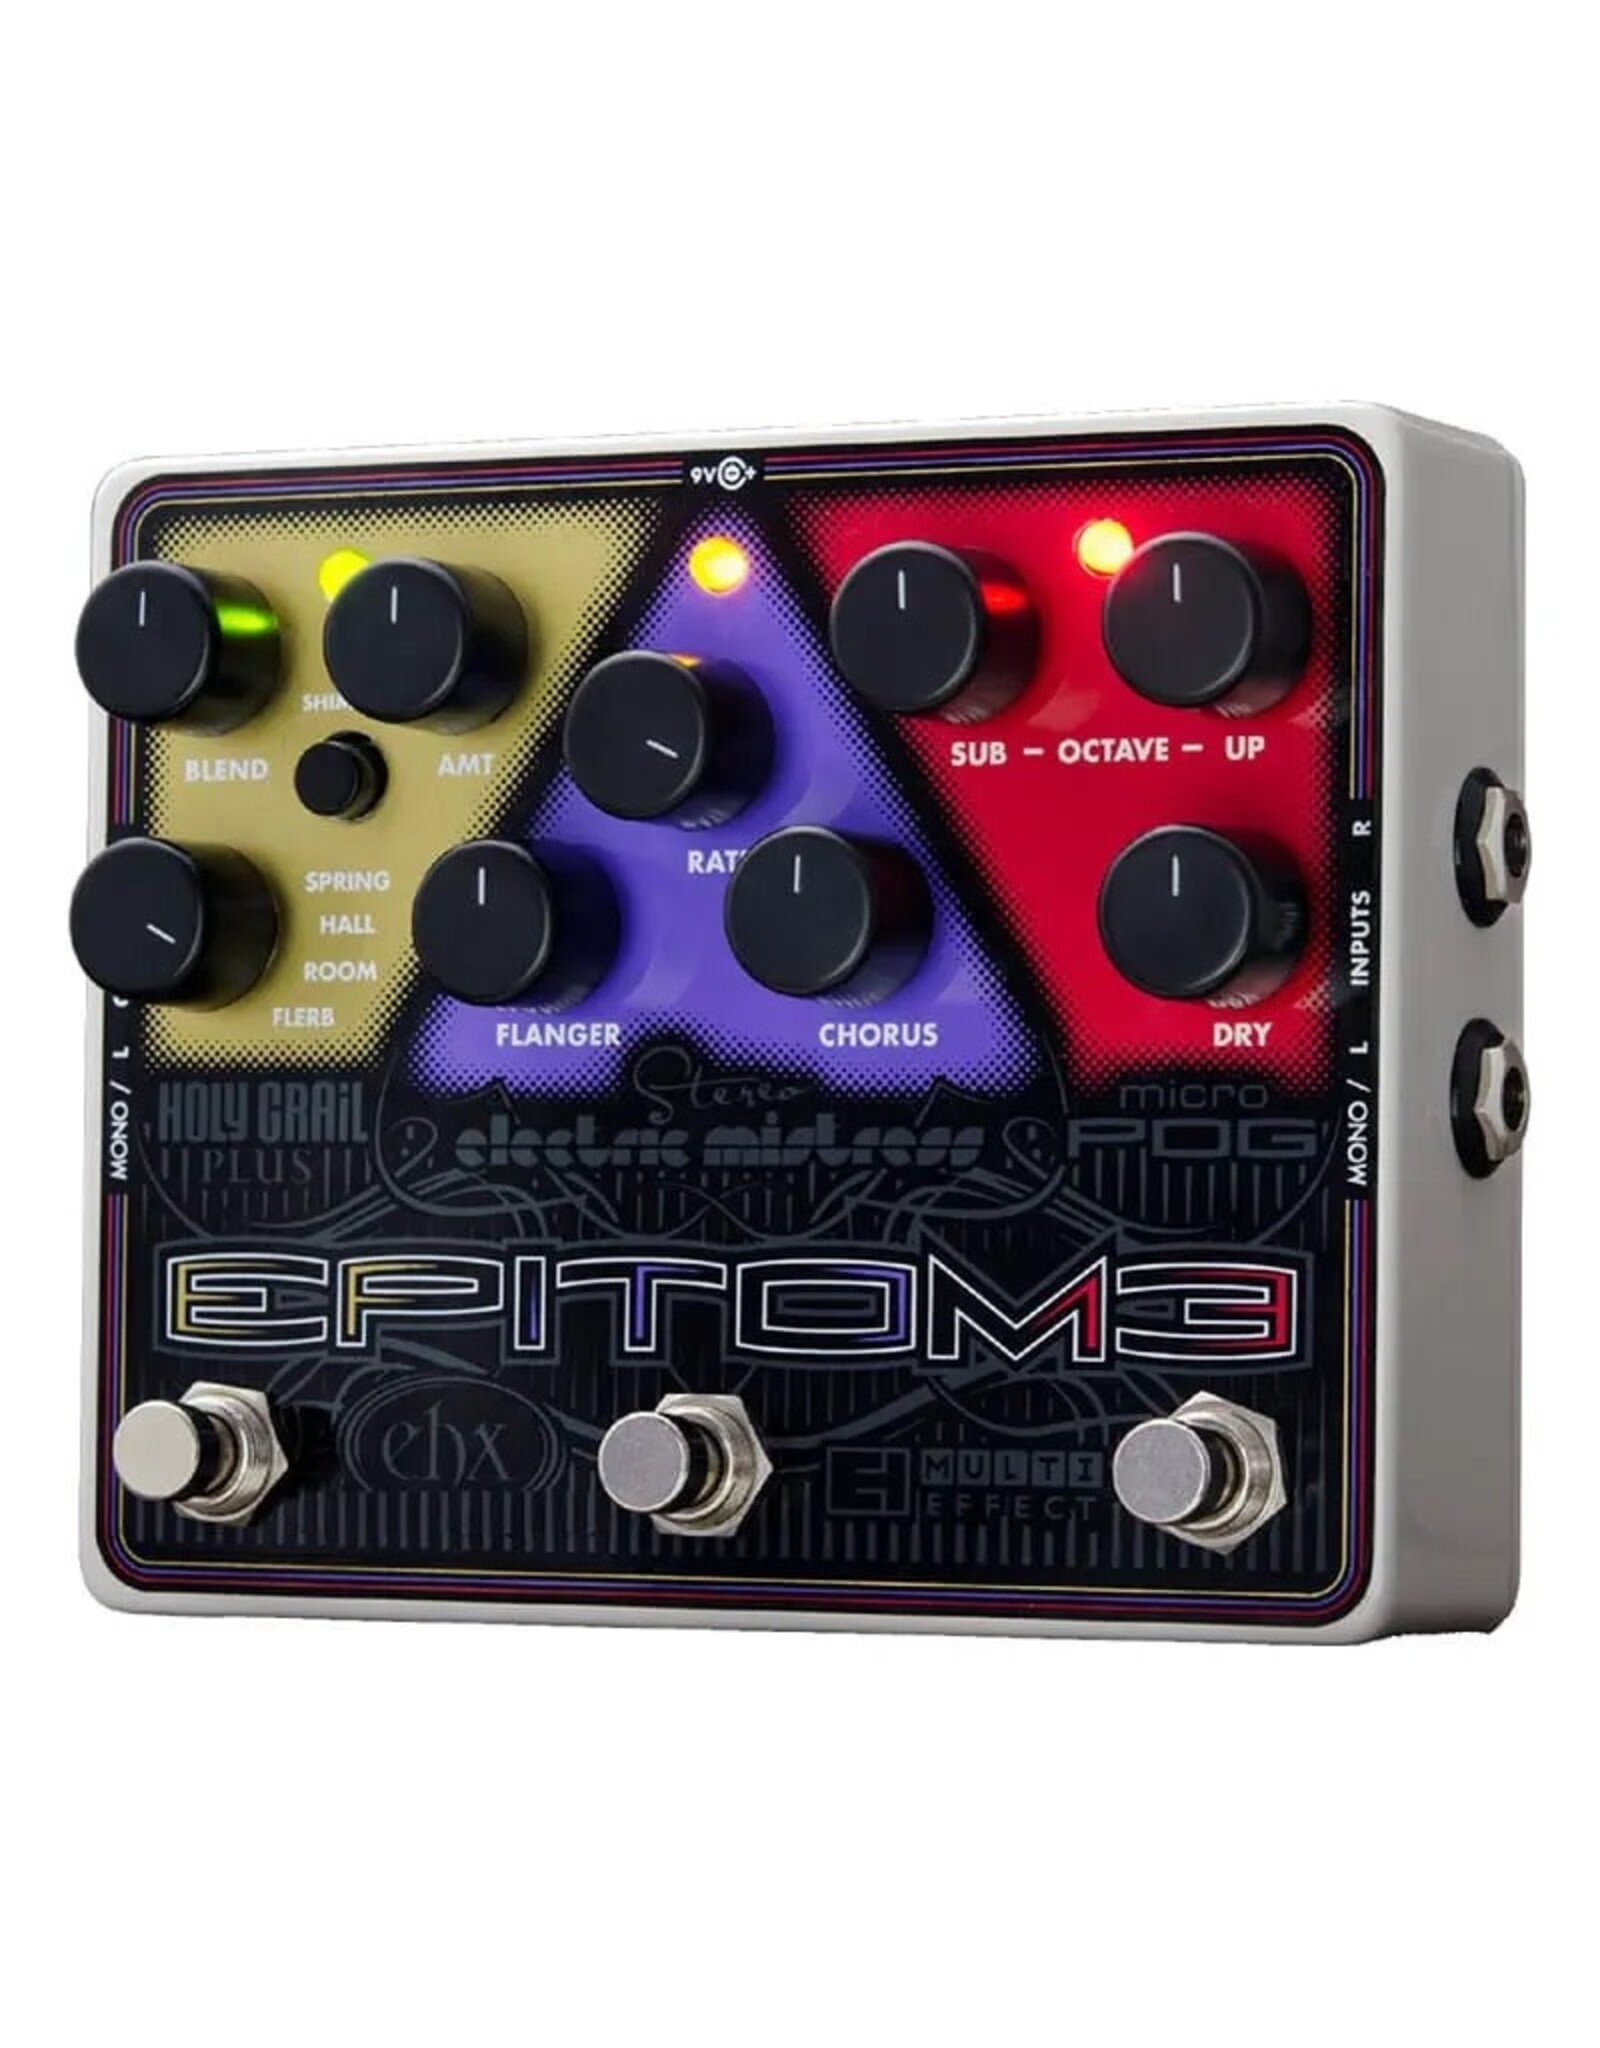 Electro-Harmonix Epitome Multi-effects pedal: Micro POG, Stereo Electric Mistress, Holy Grail Plus, 9.6DC-200 PSU Included